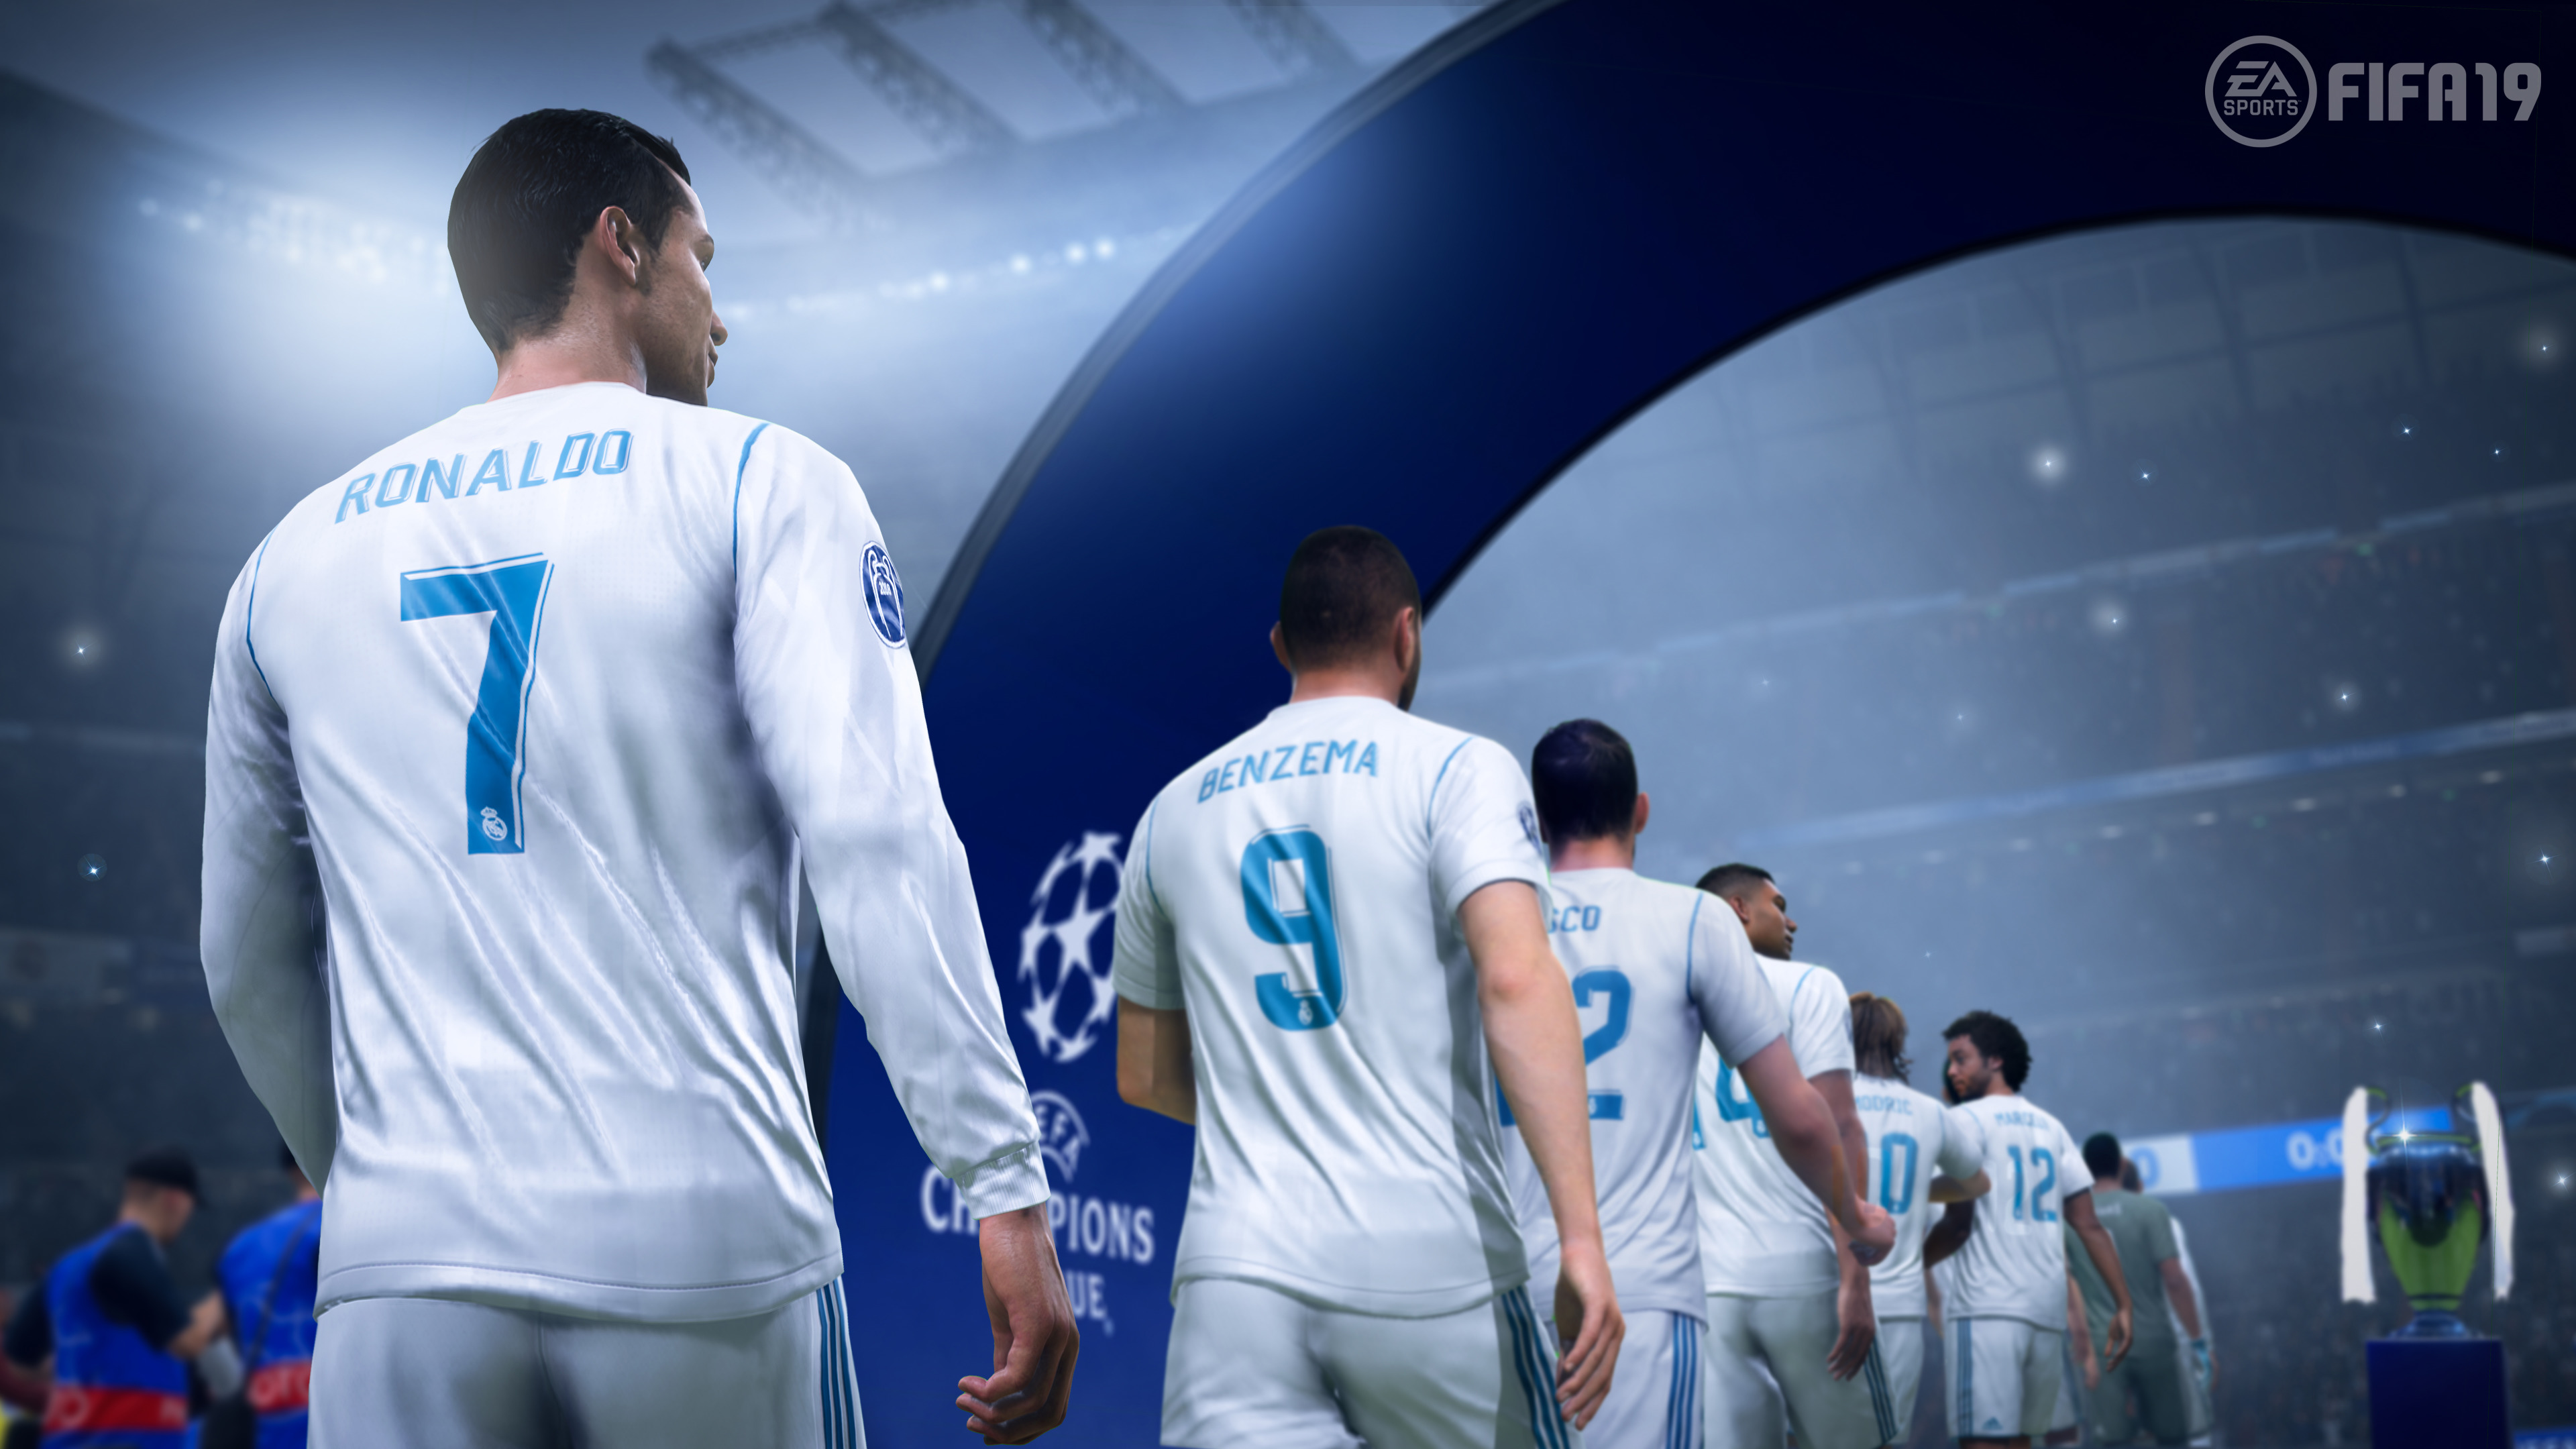 Fifa 19 Ronaldo HD Games 4k Wallpapers Images Backgrounds